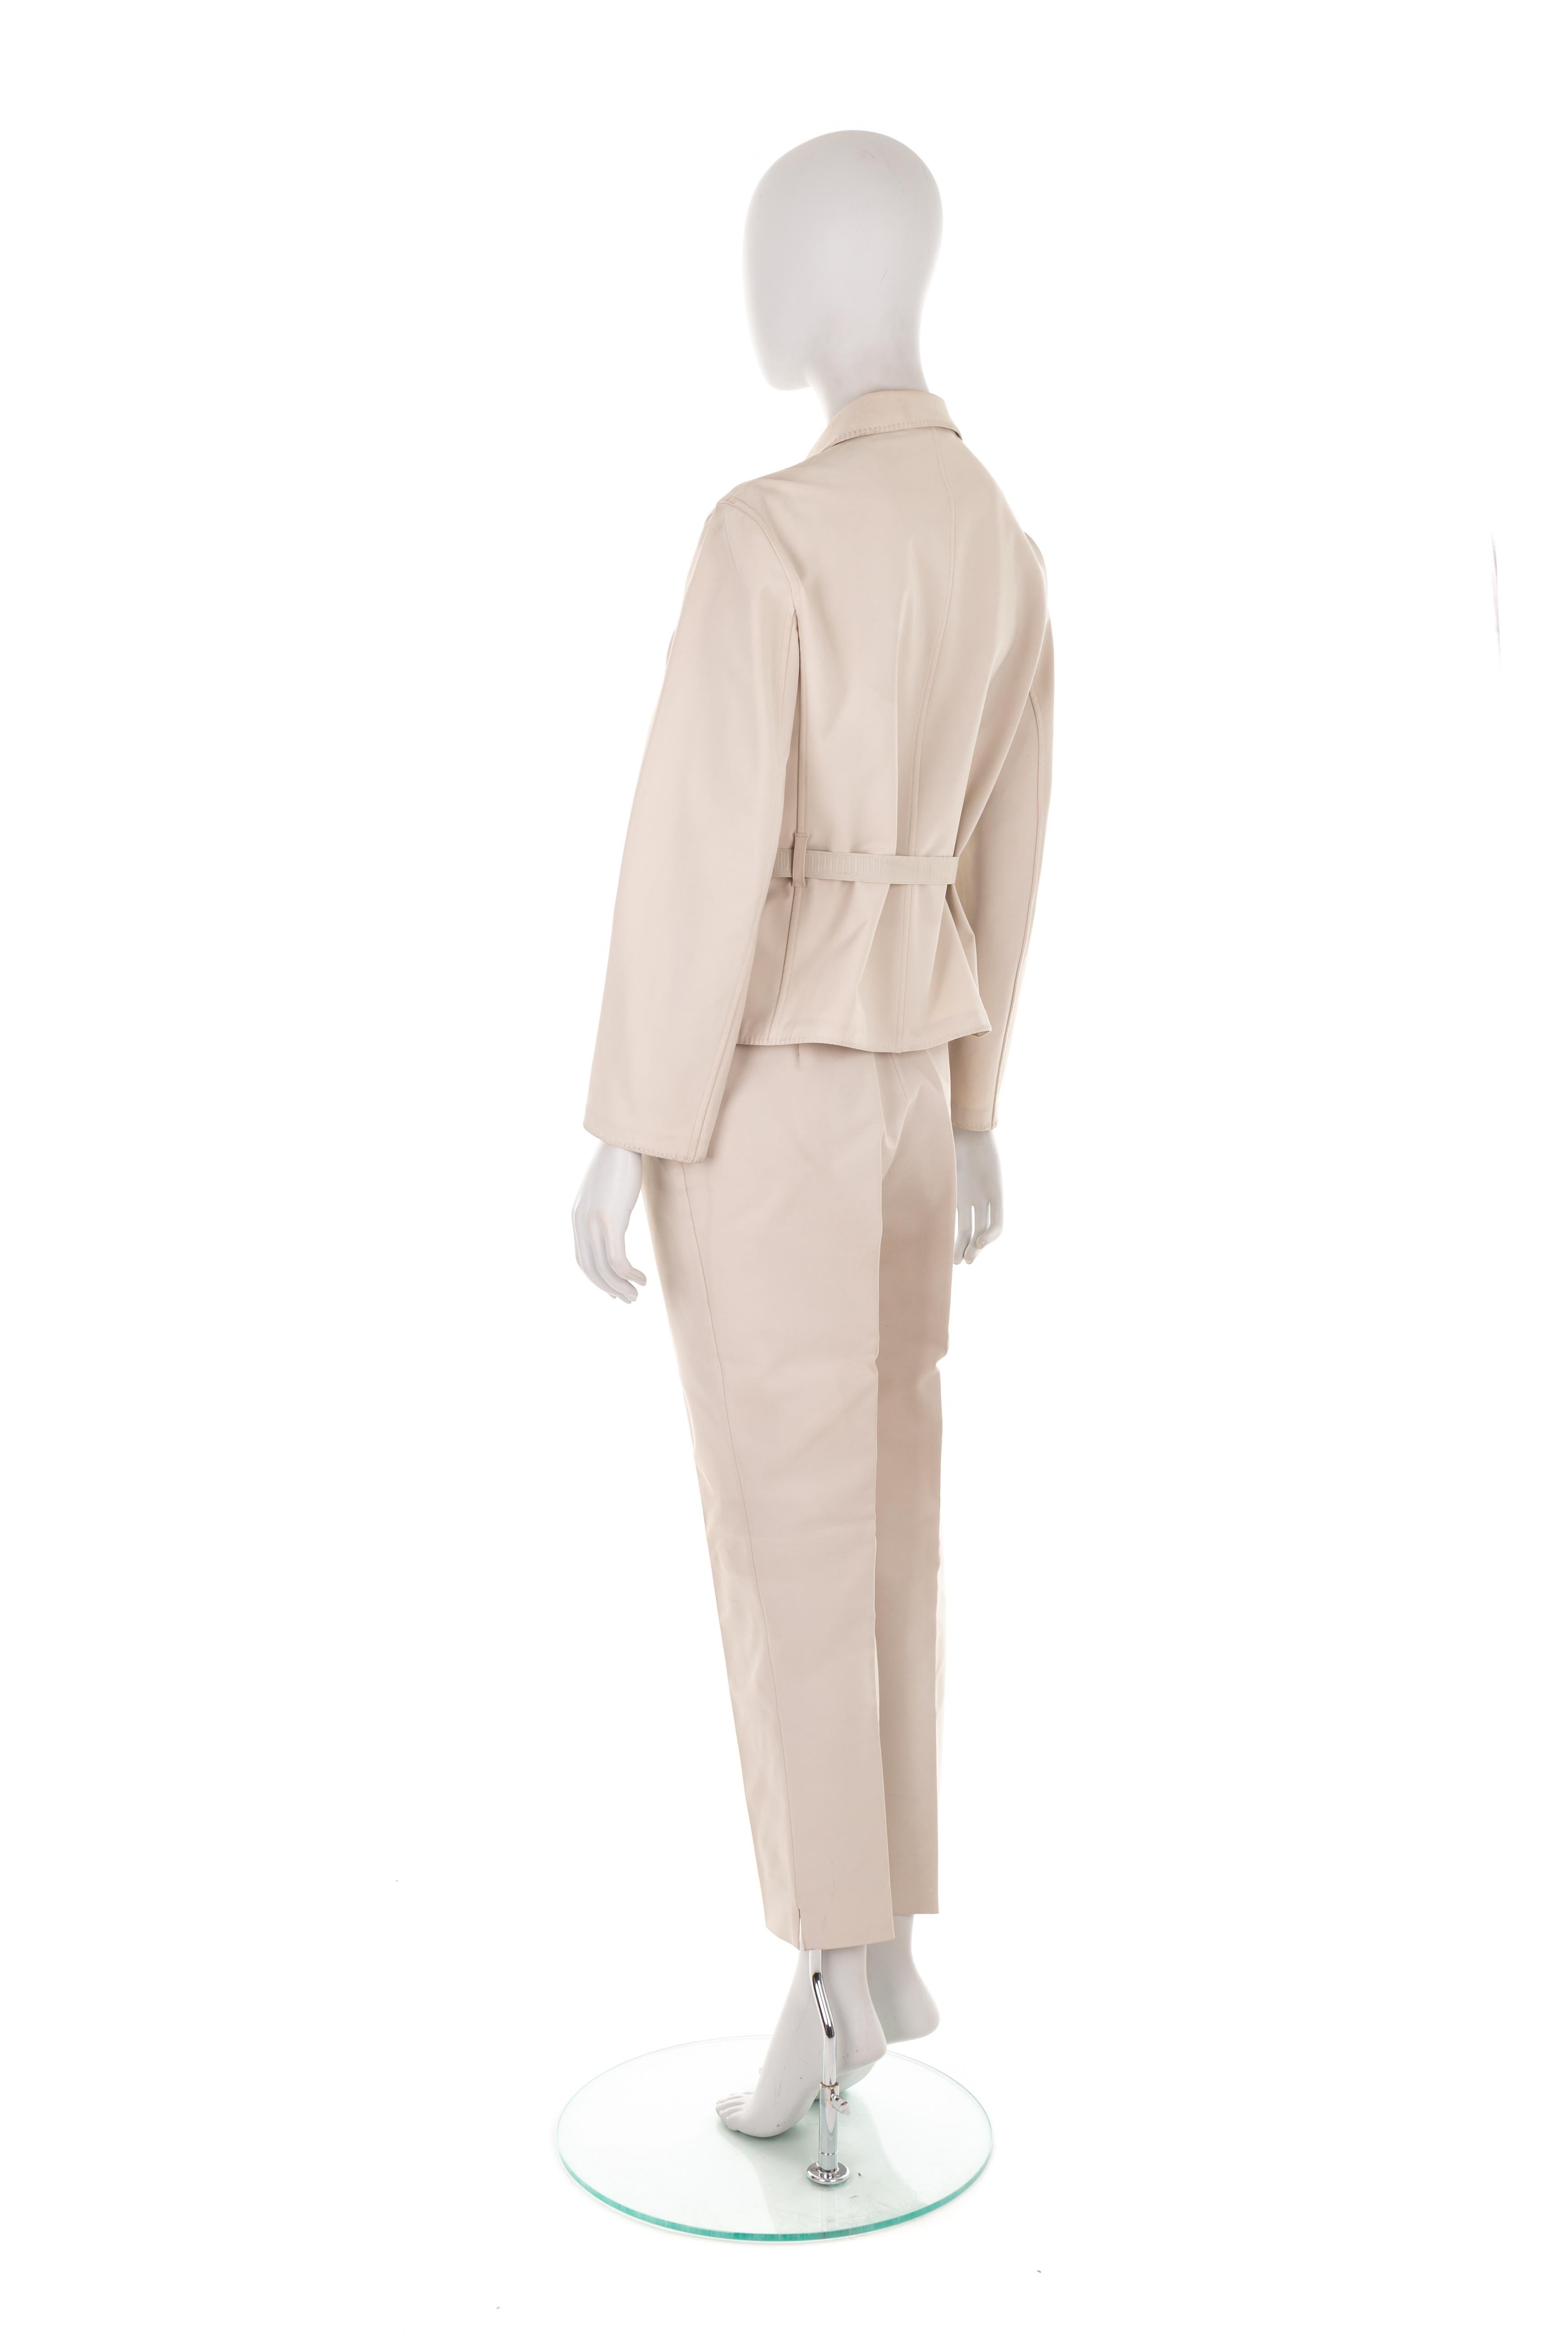 Women's Prada S/S 1998 off-white pant suit with clip logo belt For Sale